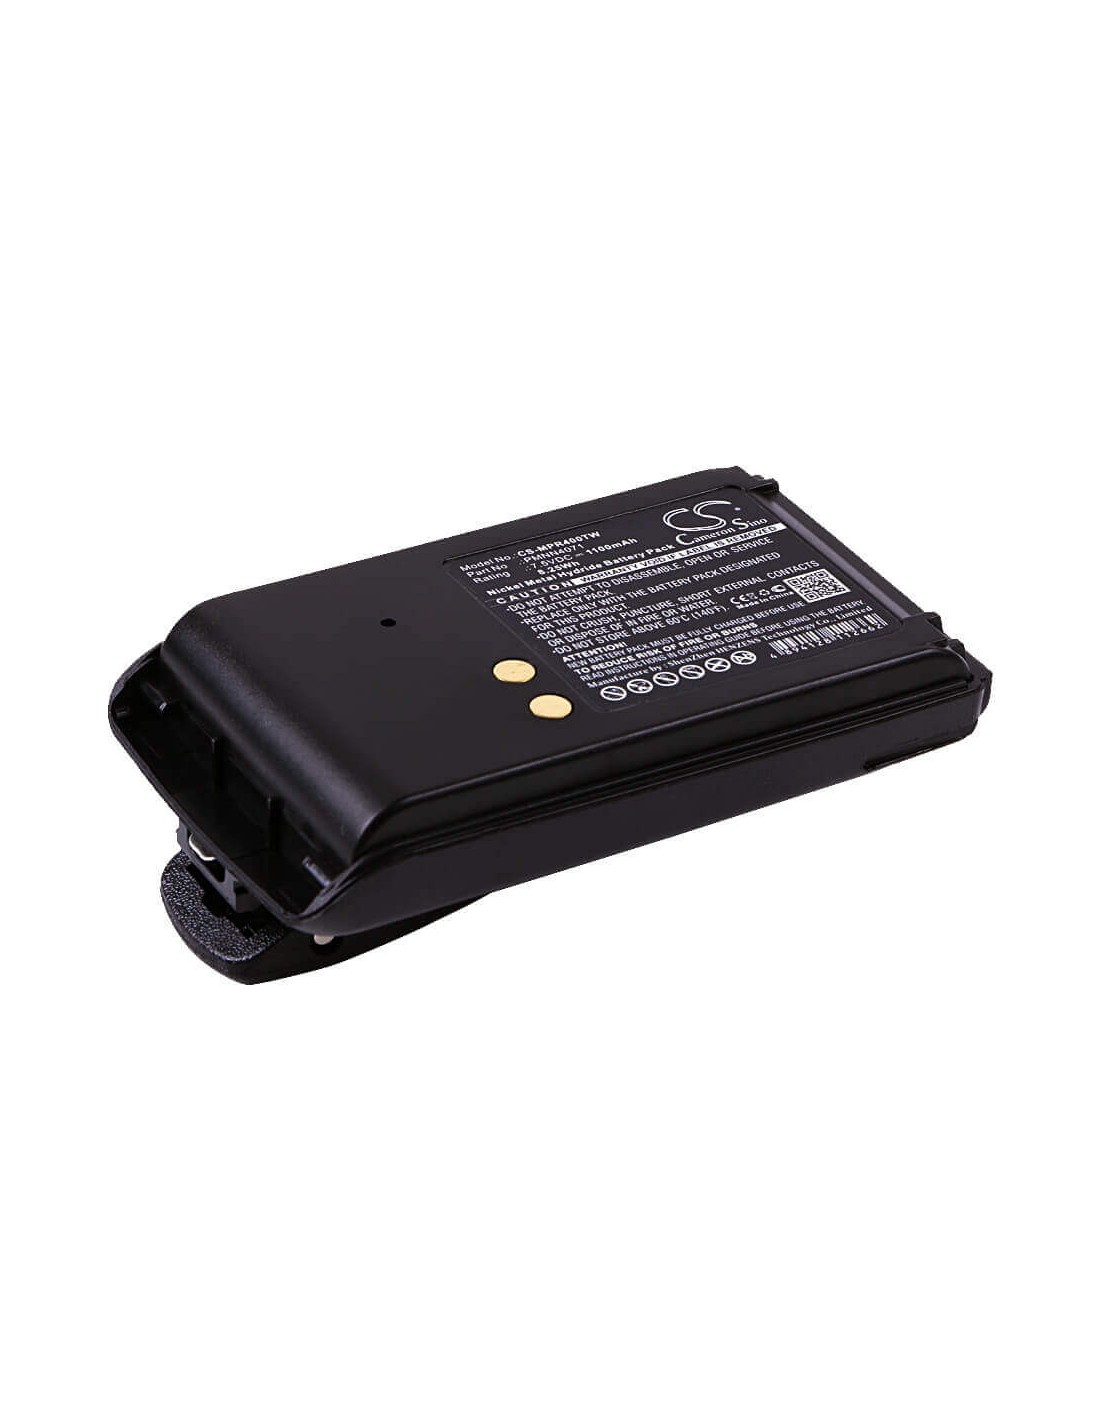 Battery for Motorola Mag One Bpr40, A8 7.5V, 1100mAh - 8.25Wh